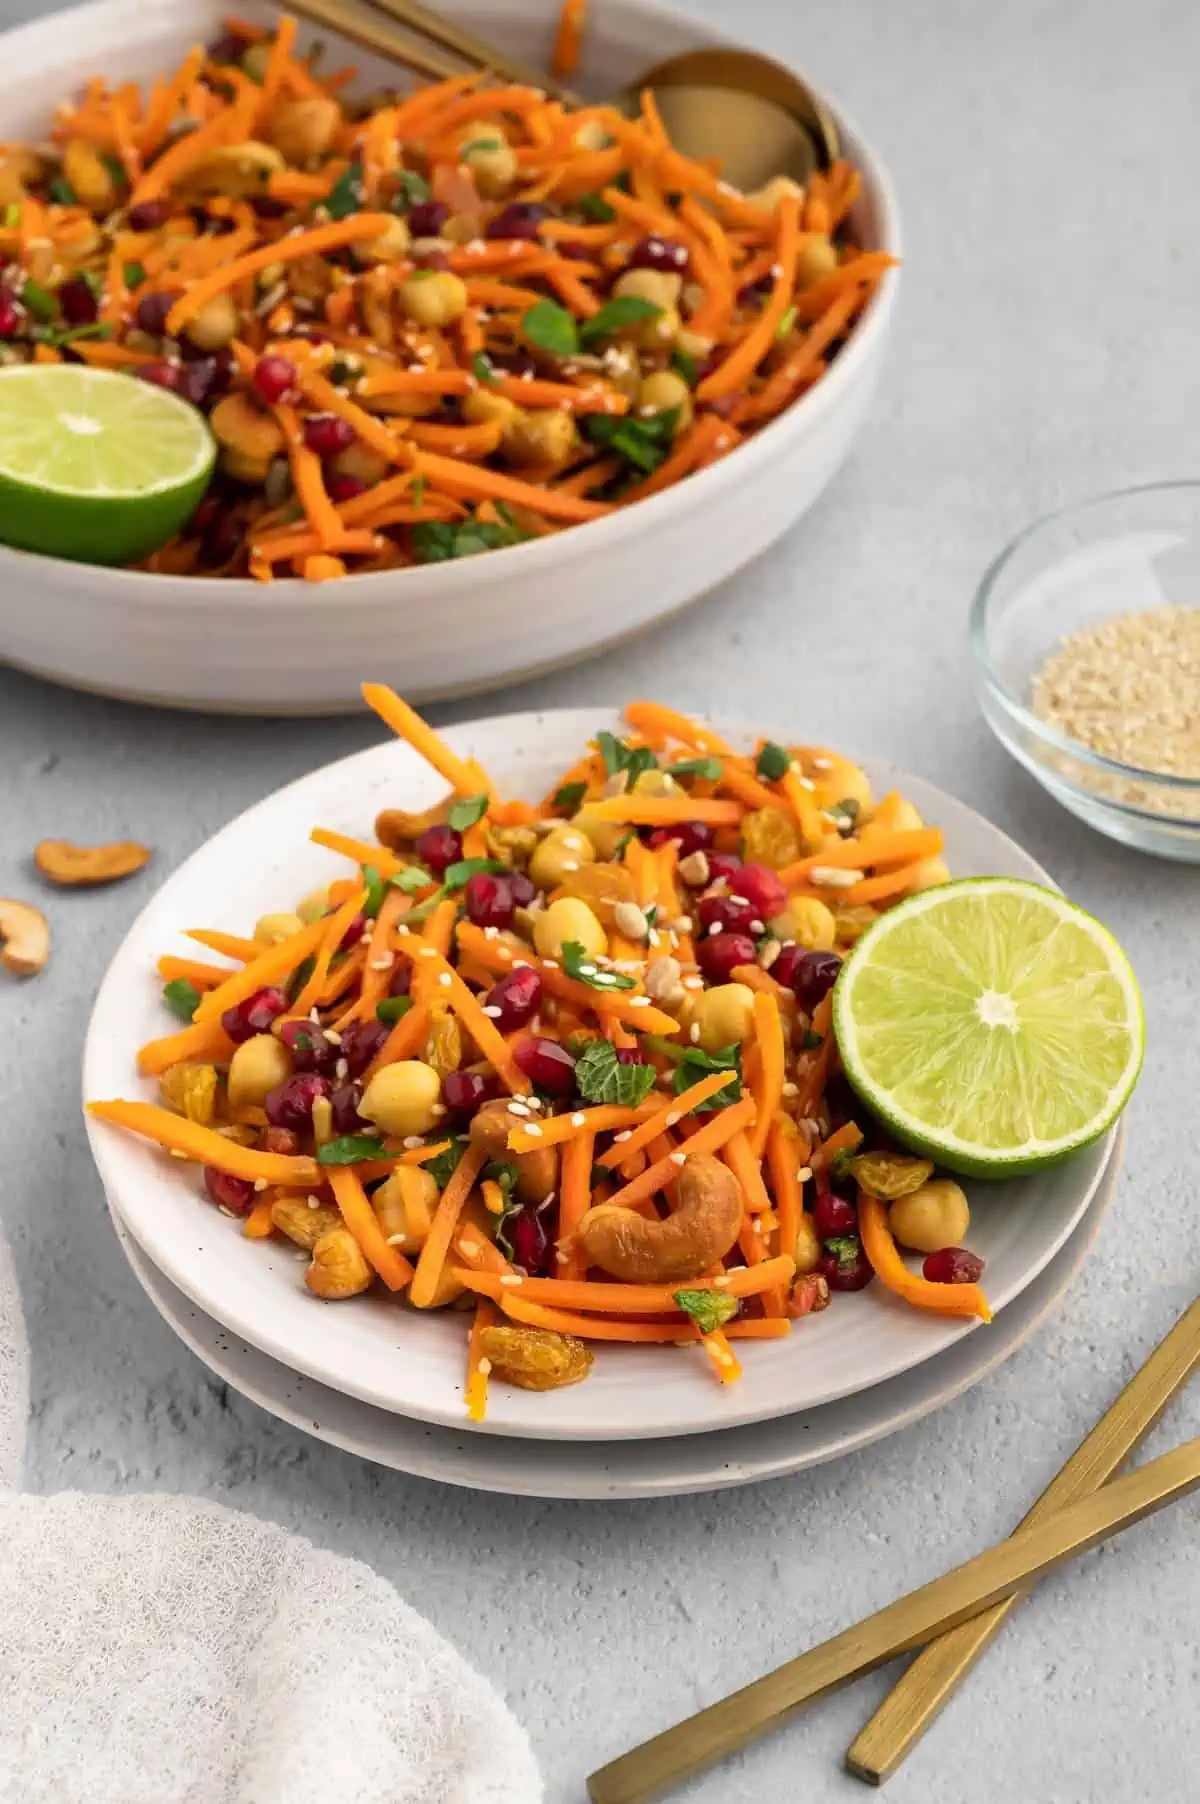 A plate of Moroccan carrot salad with a lime wedge.